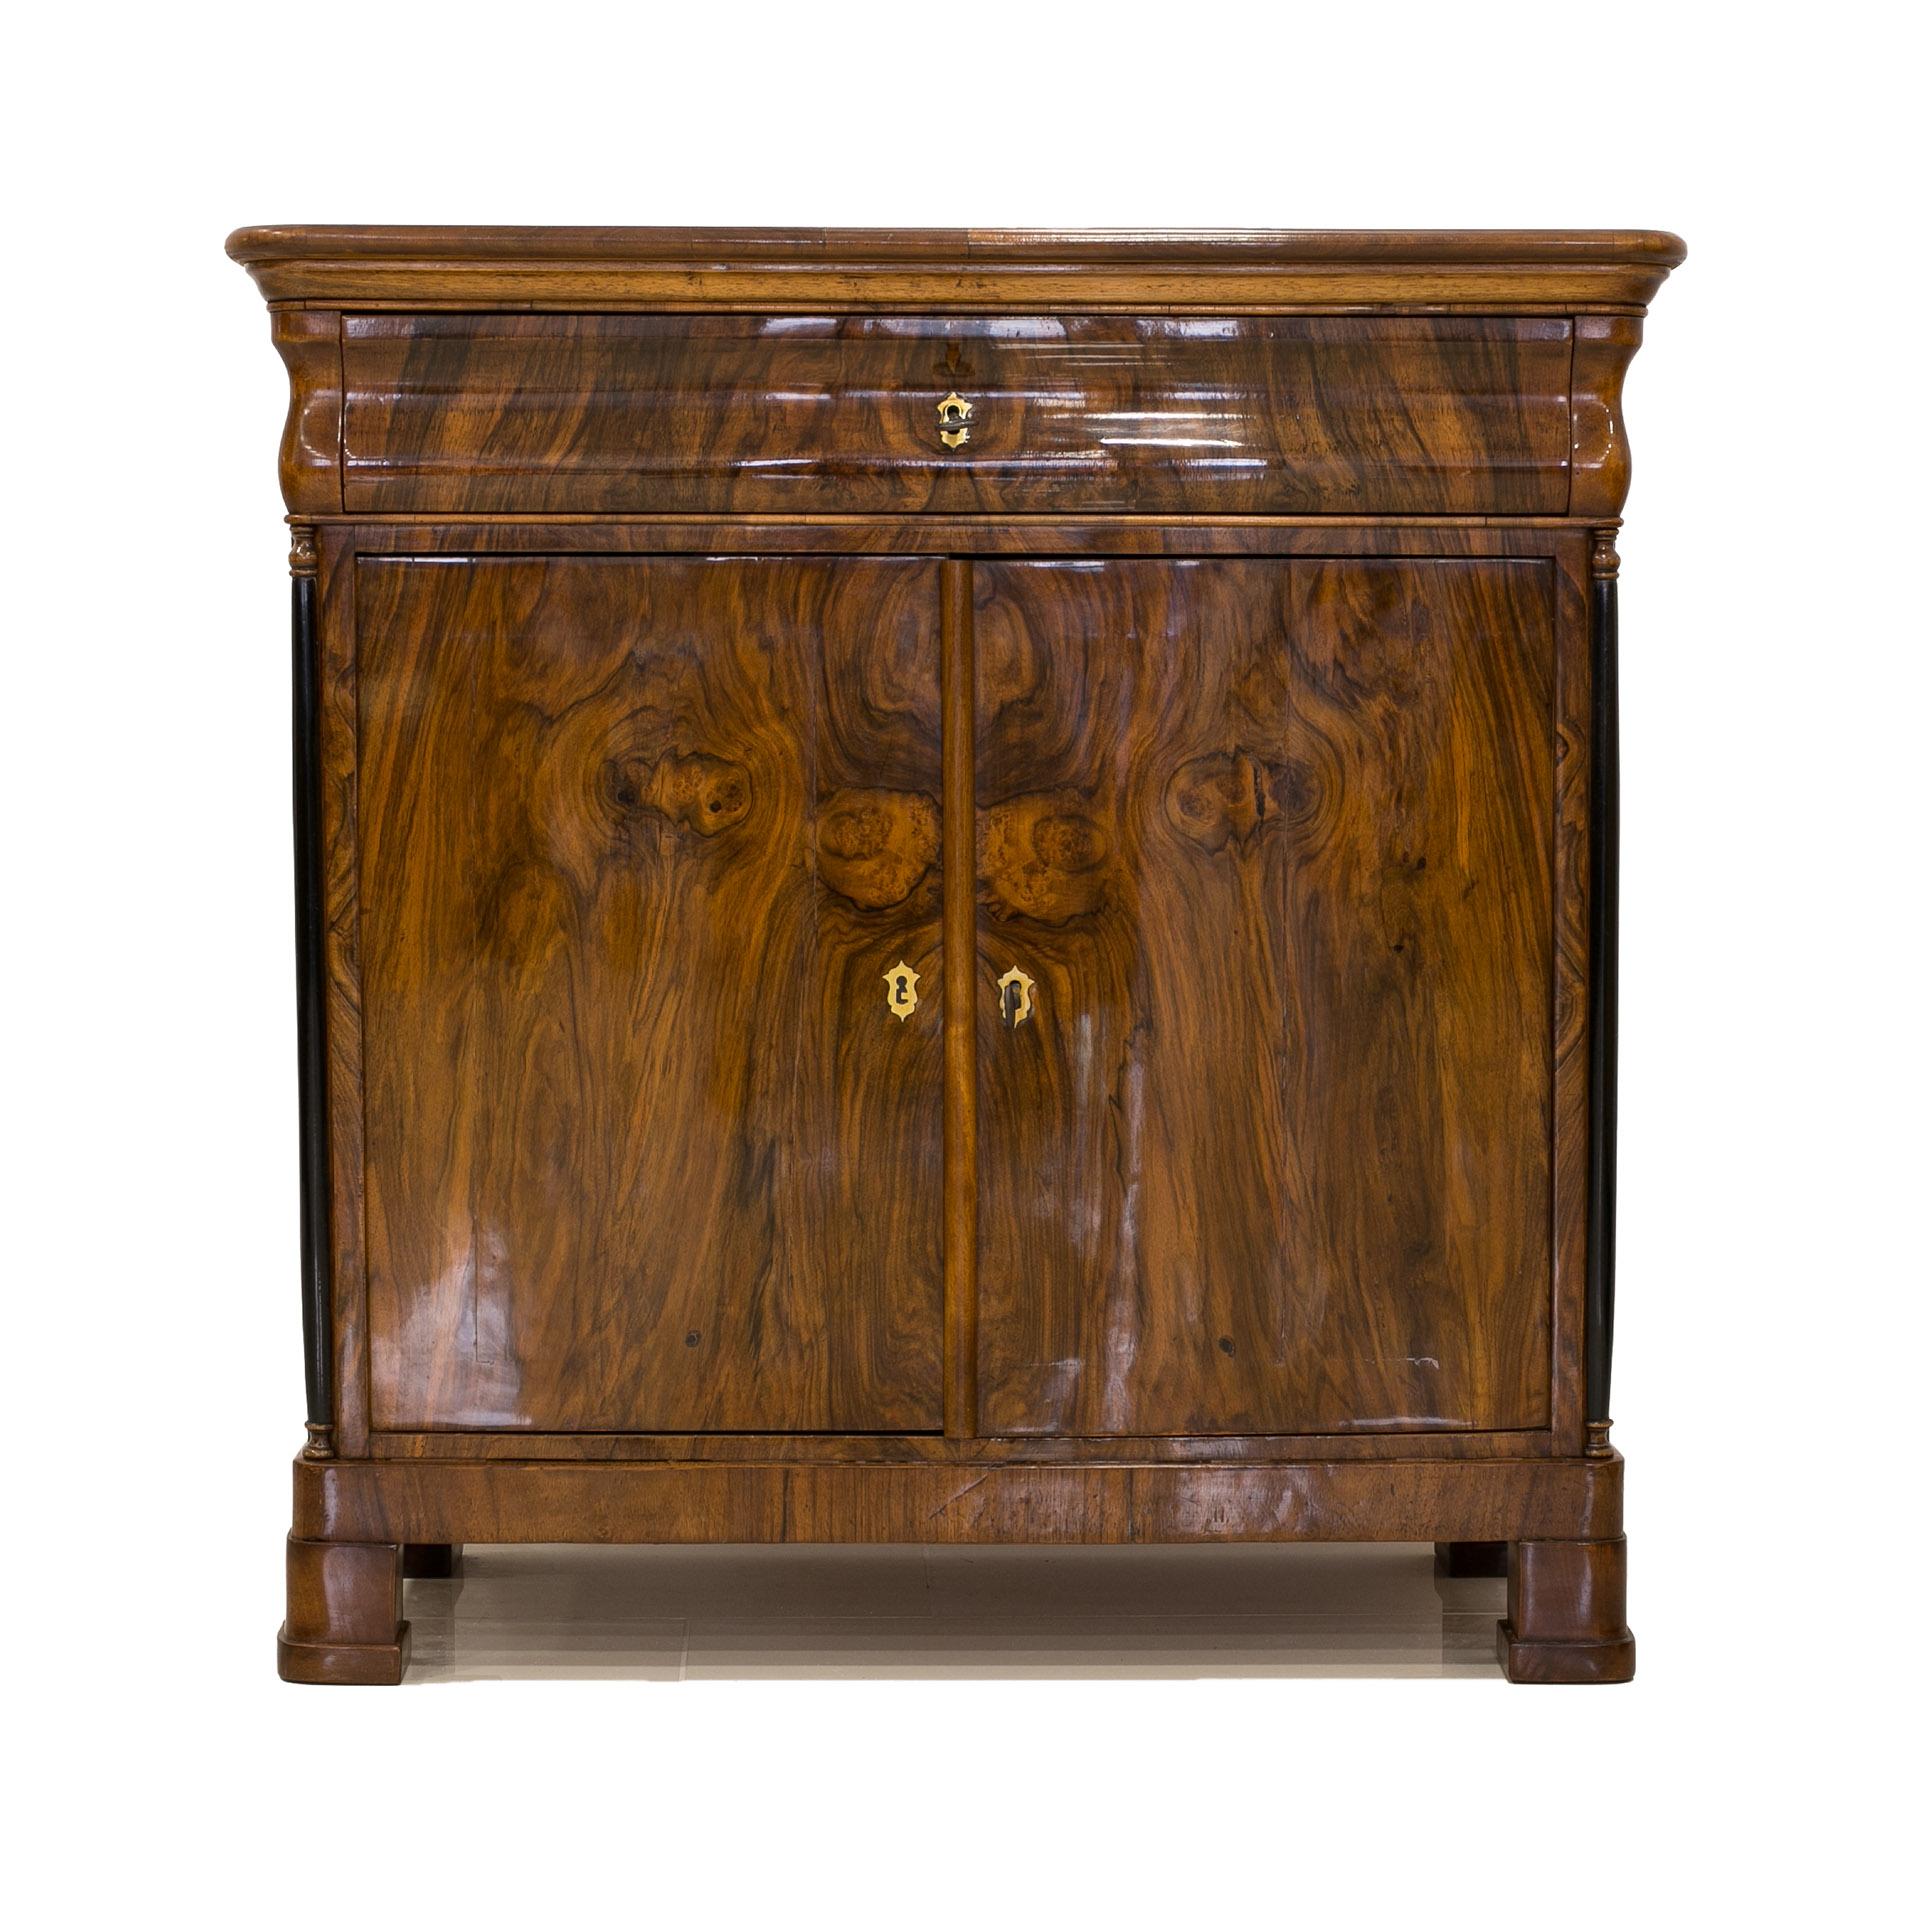 This Biedermeier-era commode was made in Germany in the first half of the 19th century. The furniture is made of coniferous wood, veneered with walnut veneer that presents beautiful wood patterns. It features one practical drawer in the top section